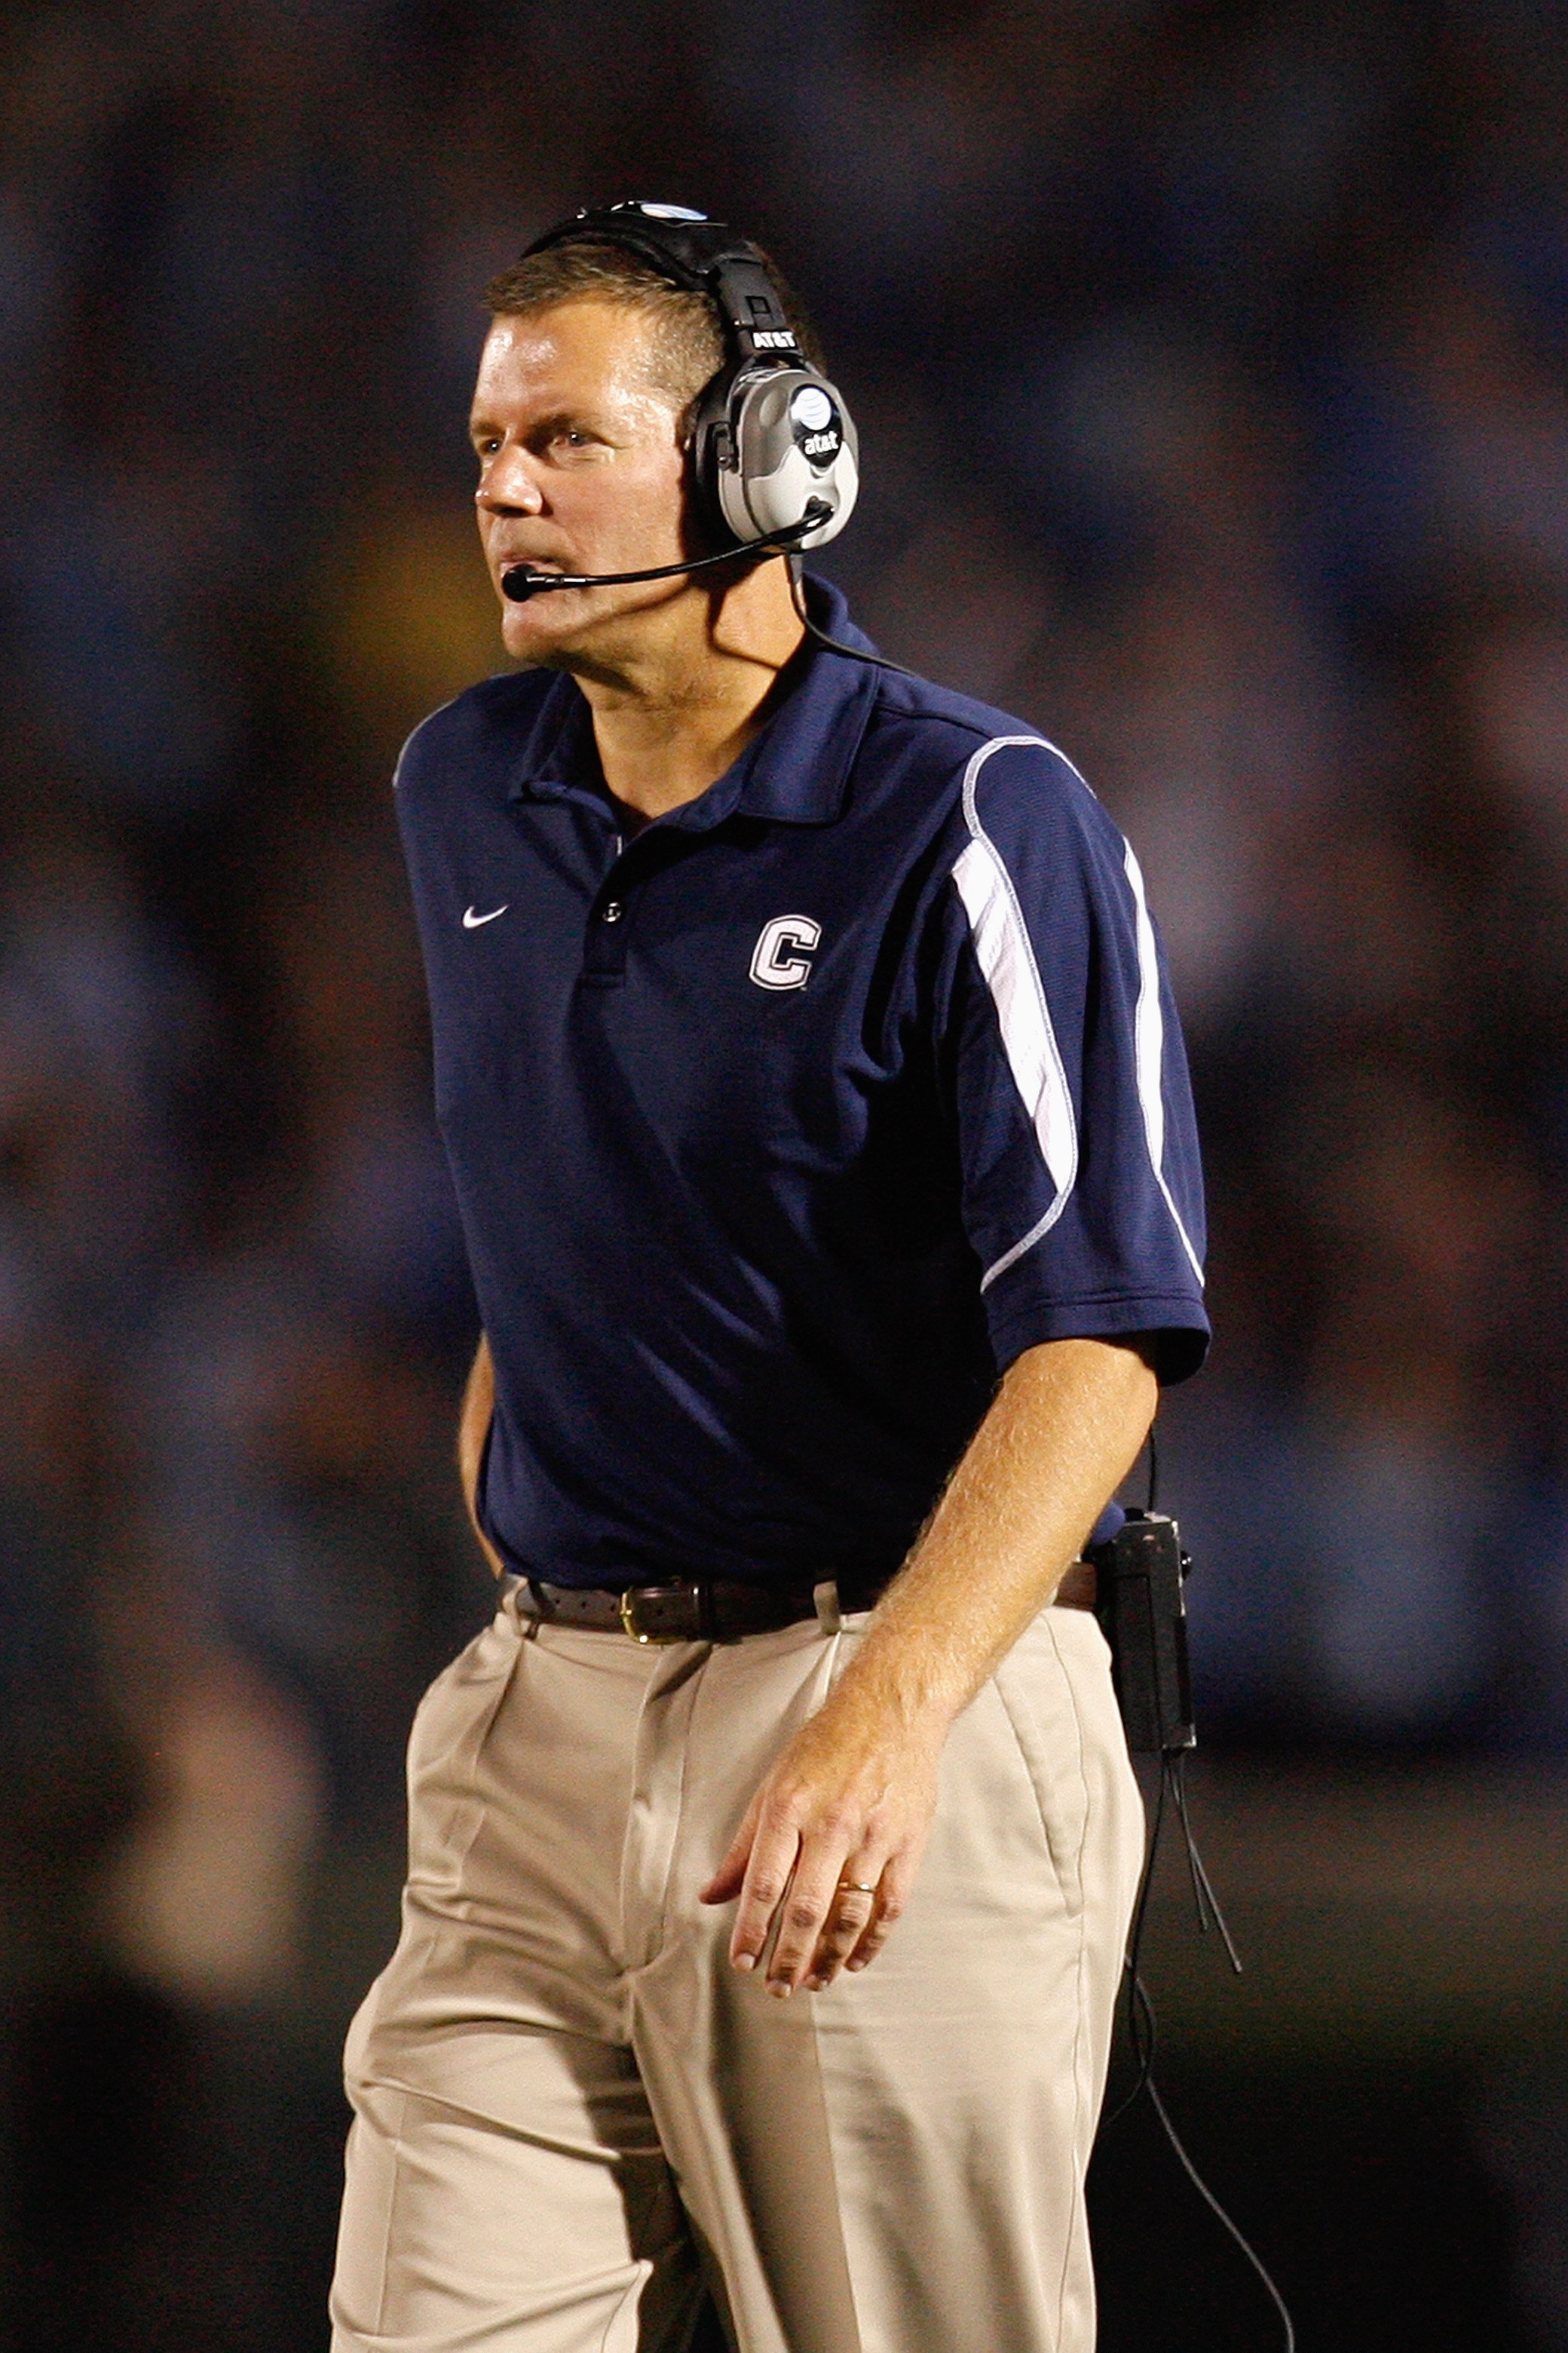 CHAPEL HILL, NC - OCTOBER 4:  Head coach Randy Edsall of the Connecticut Huskies looks on during the game against the North Carolina Tar Heels at Kenan Stadium on October 4, 2008 in Chapel Hill, North Carolina.  (Photo by Kevin C. Cox/Getty Images)